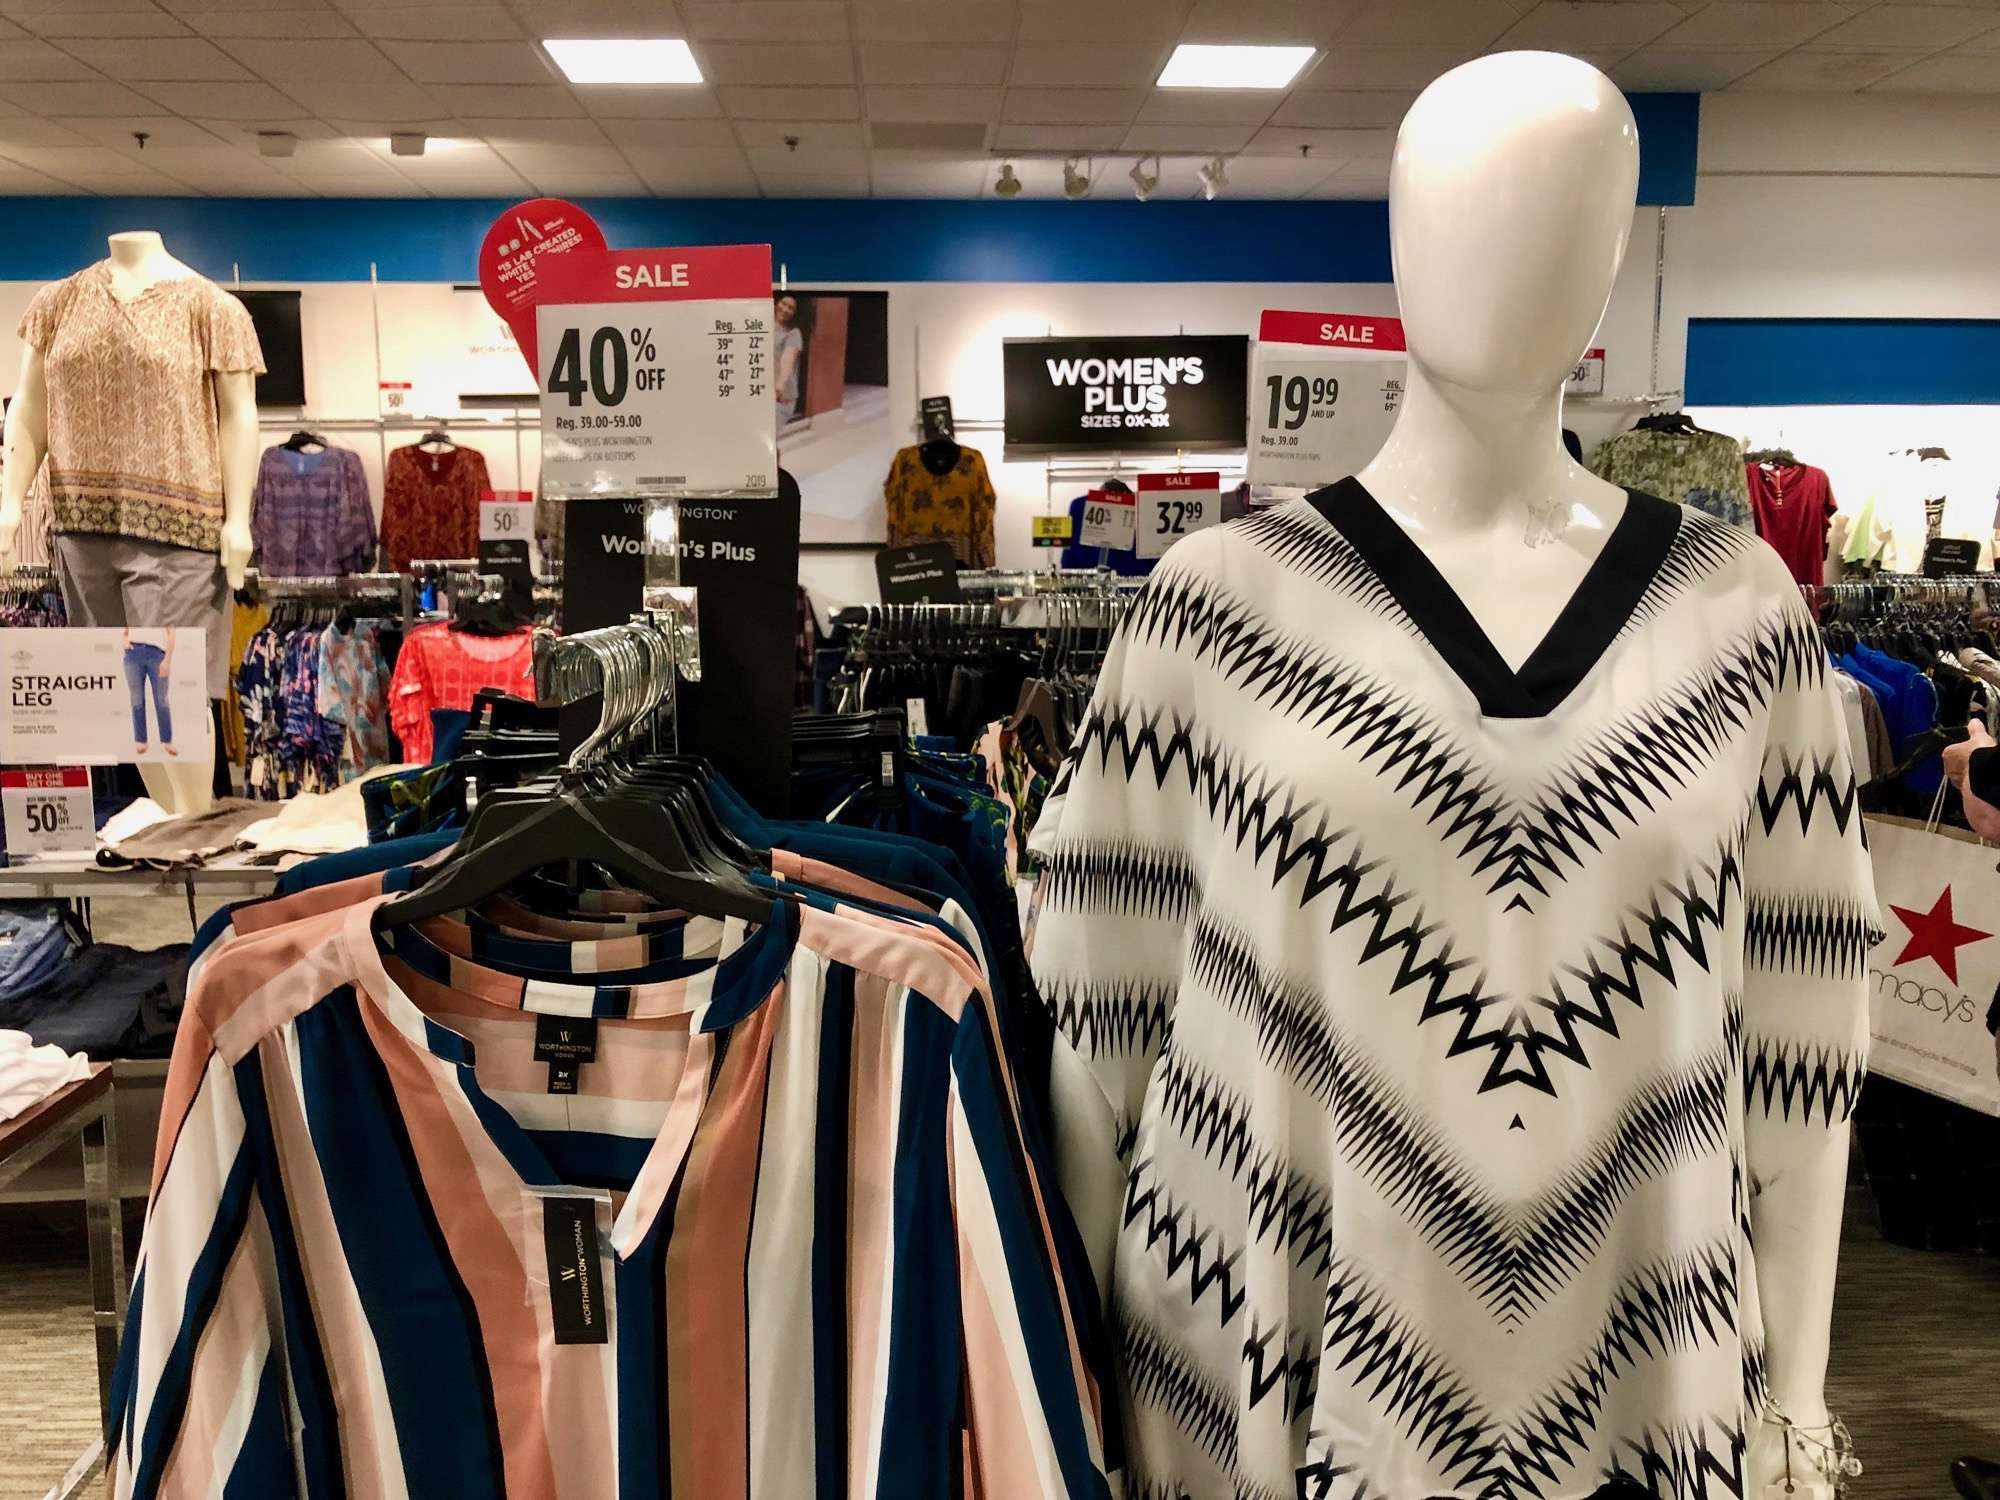 JCPenney clearance up to 80% off. It's definitely not as good as Kohl